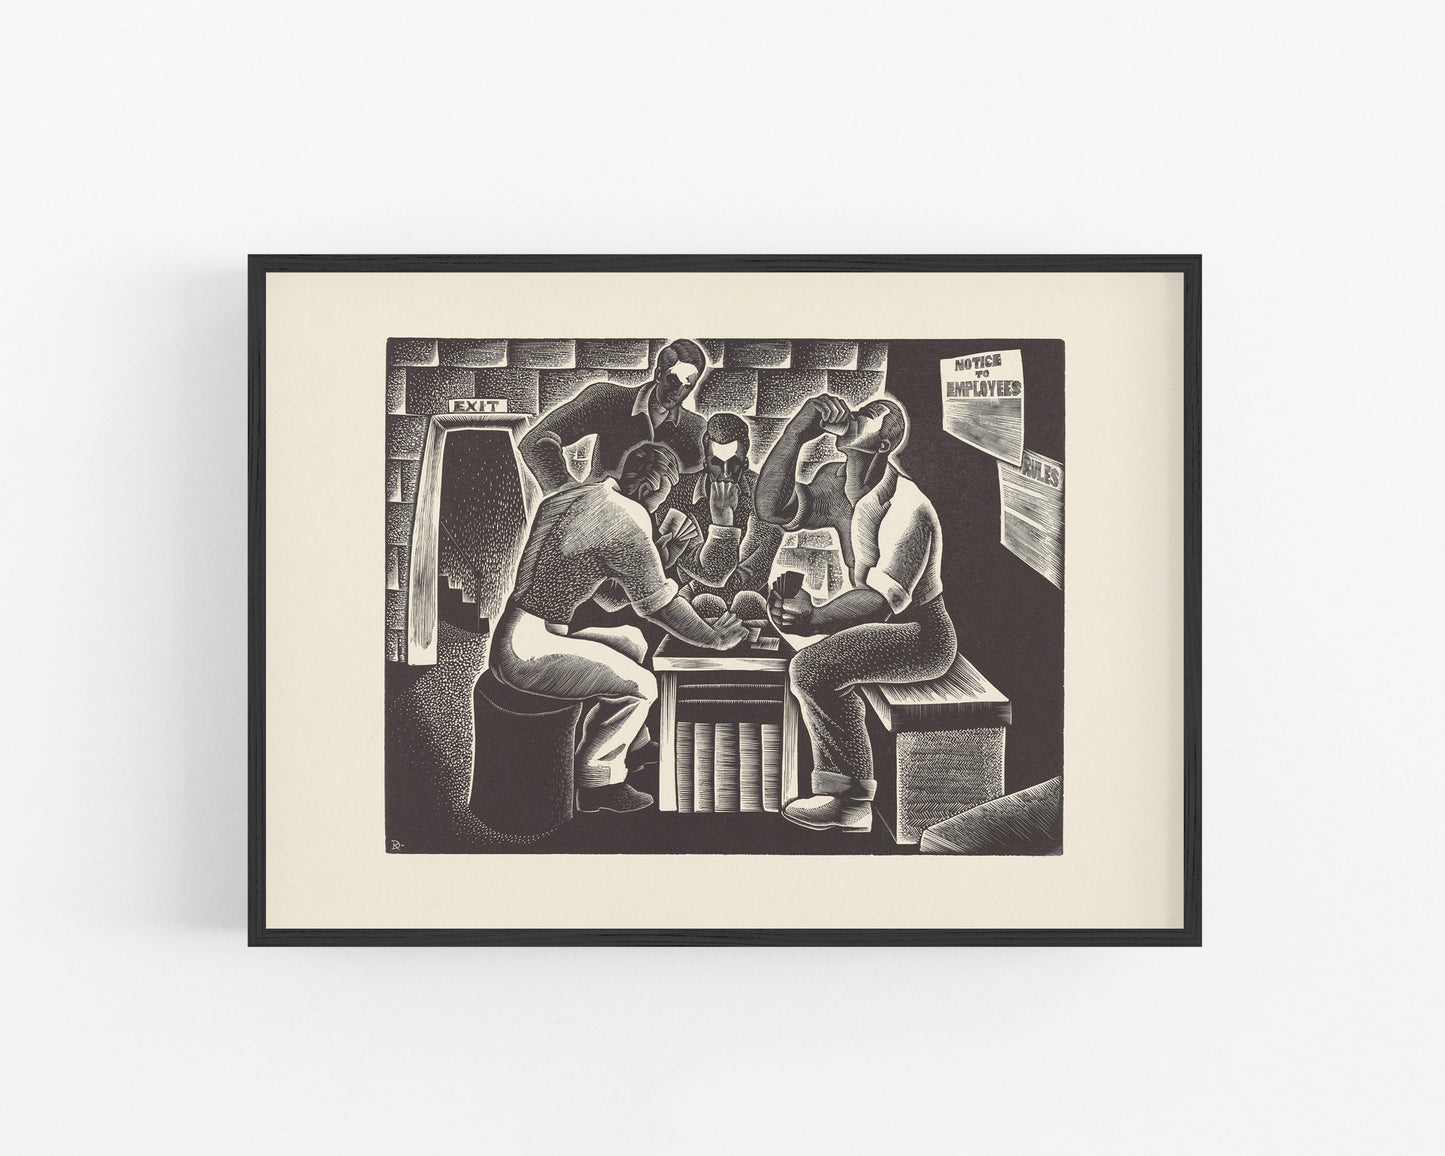 Men playing cards over lunch break | Noon game | African American art | Vintage wood cut | Living, game, work room decor | Eco-friendly gift